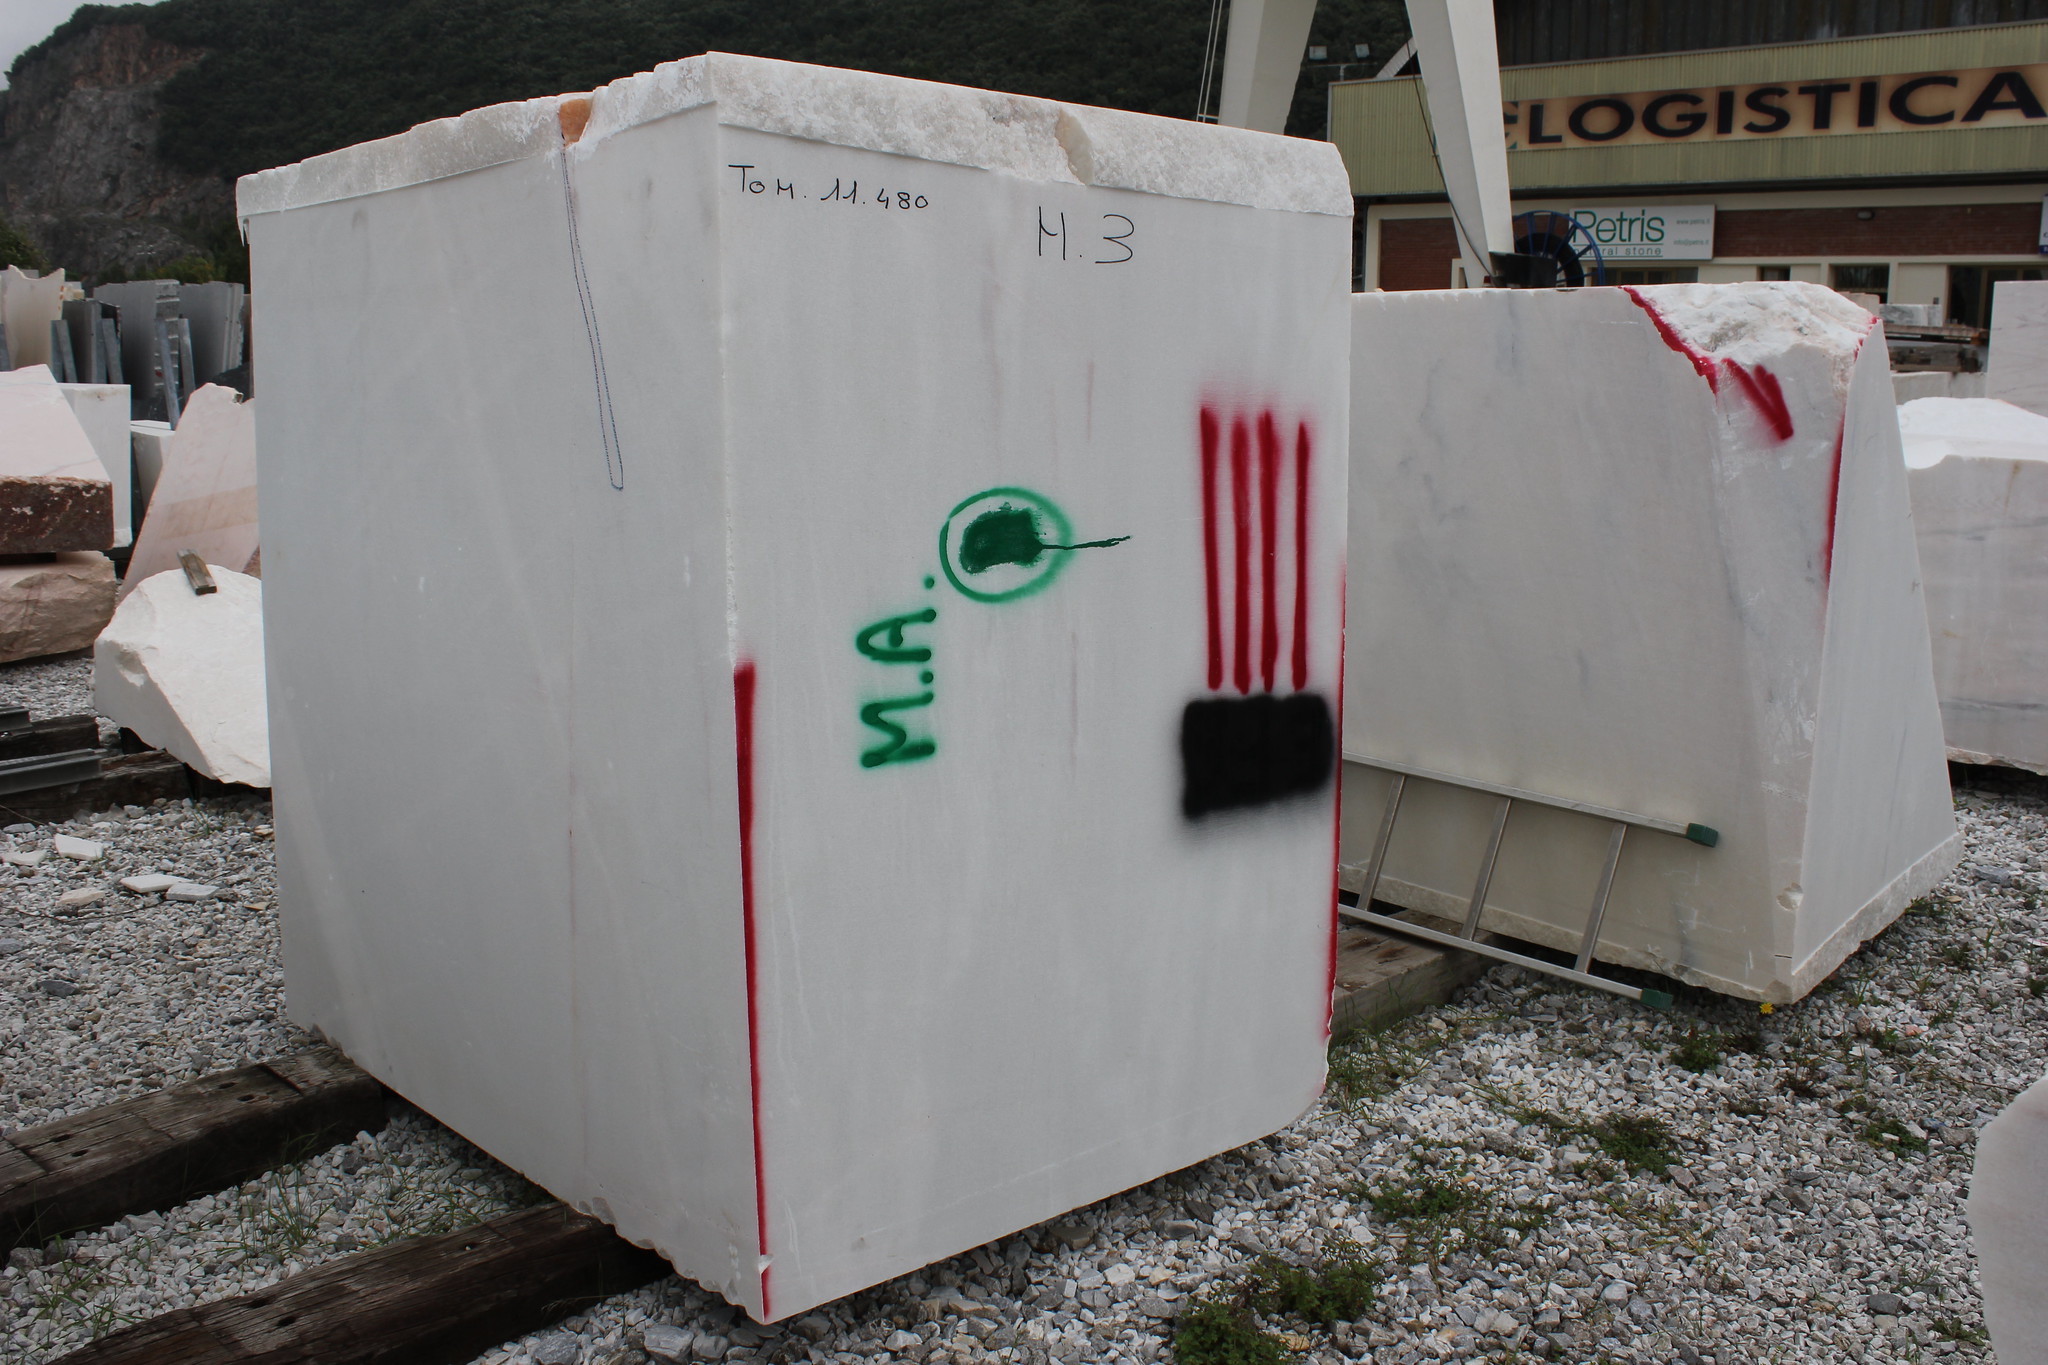 a hunk of Carrara marble in italy, now harder to acquire because of coronavirus